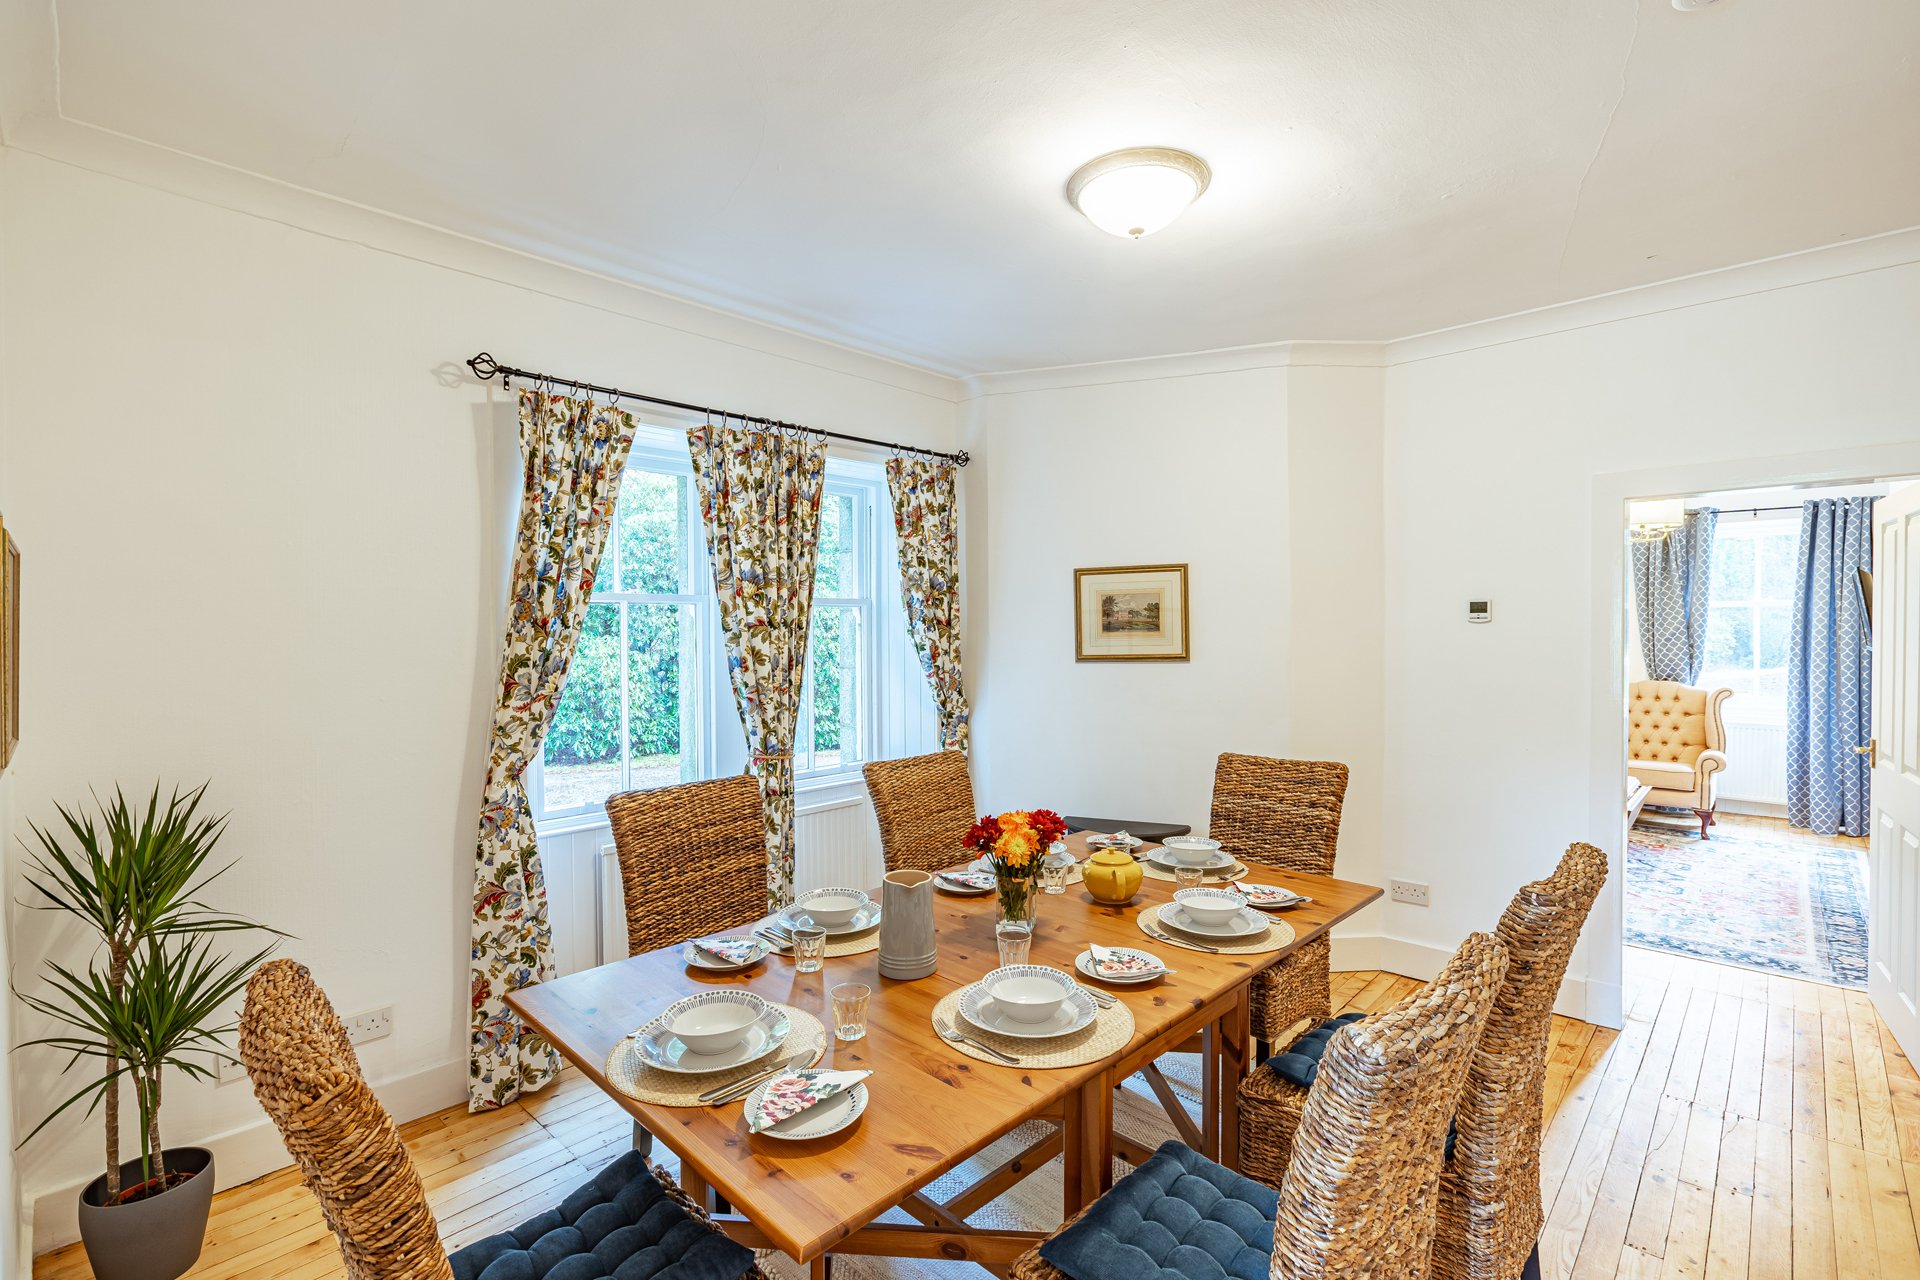 Self-catering West Lodge